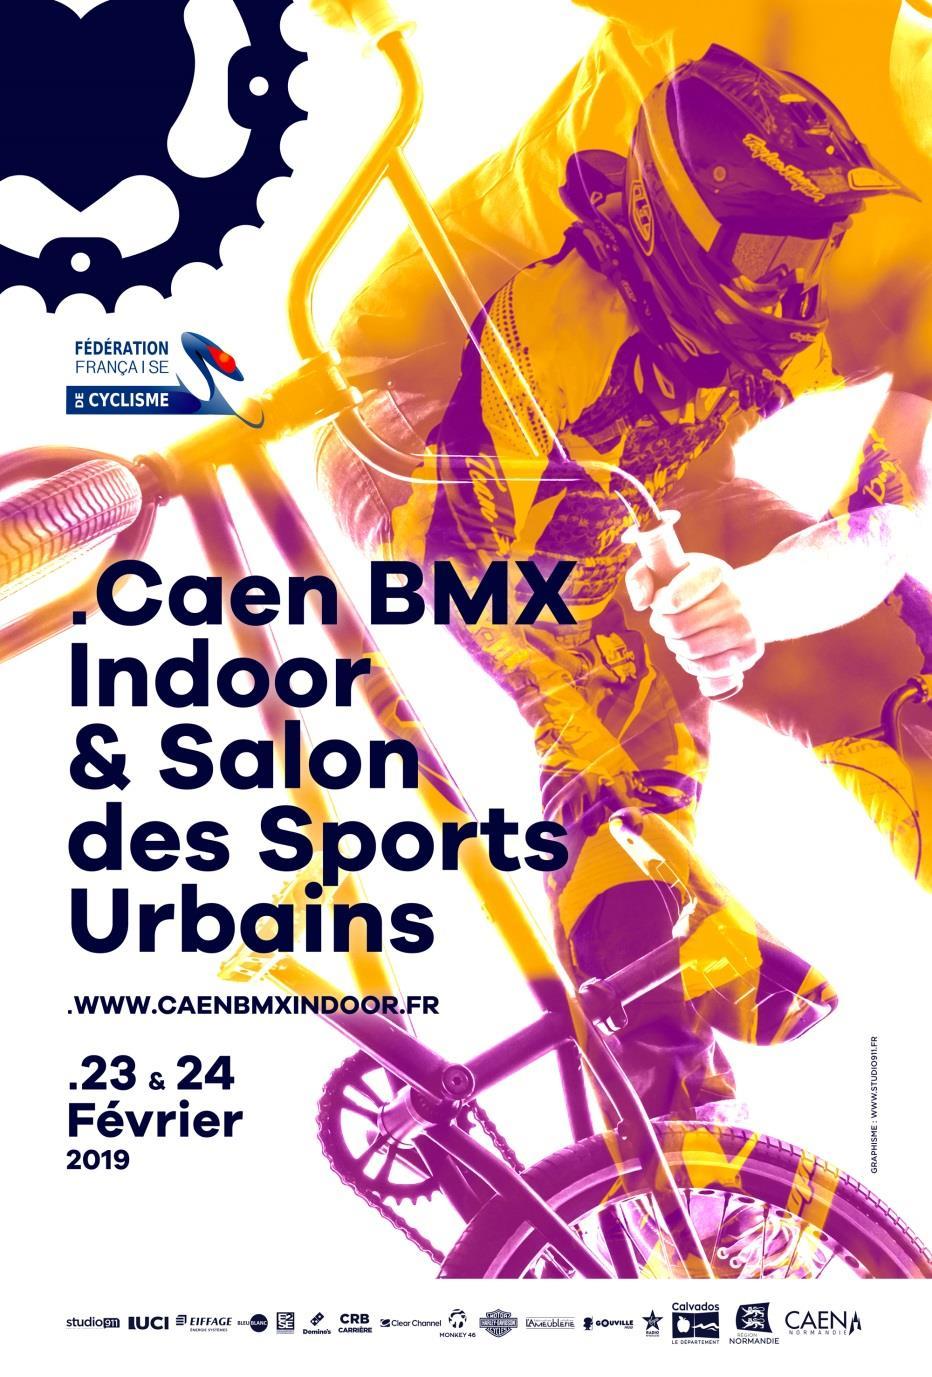 BMX COMPETITION GUIDE Caen BMX Indoor INTERNATIONAL COMPETITIONS Registration / Regulations 3 Sign-in desk 4 Competition schedule 5 Prize money / Awards 6 PRACTICAL INFORMATION Venue map